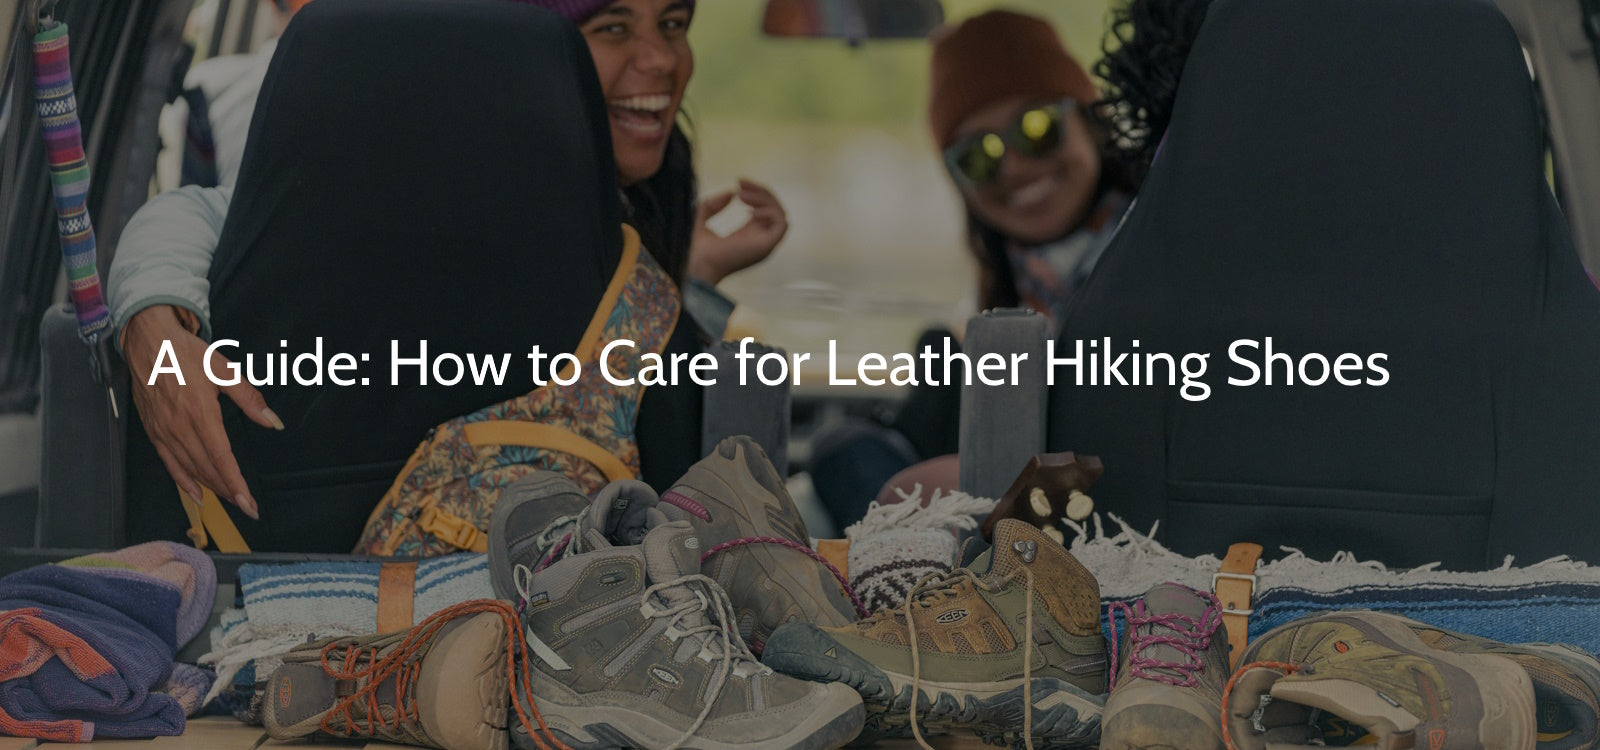 A Guide: How to Care for Leather Hiking Shoes - The Urban Gear